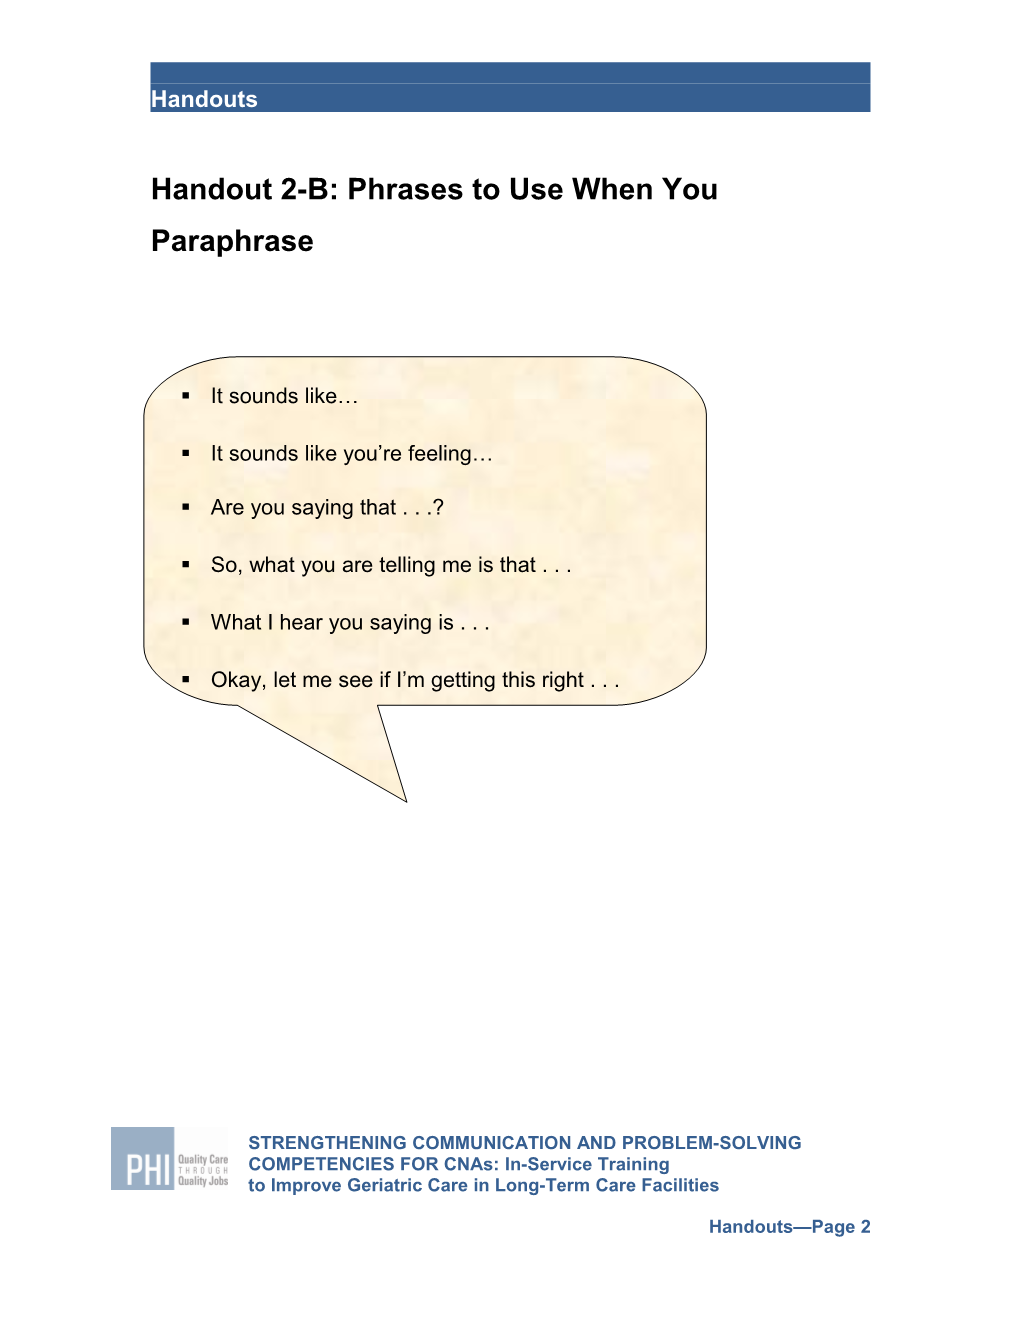 Handout 2-A: Overview of Paraphrasing